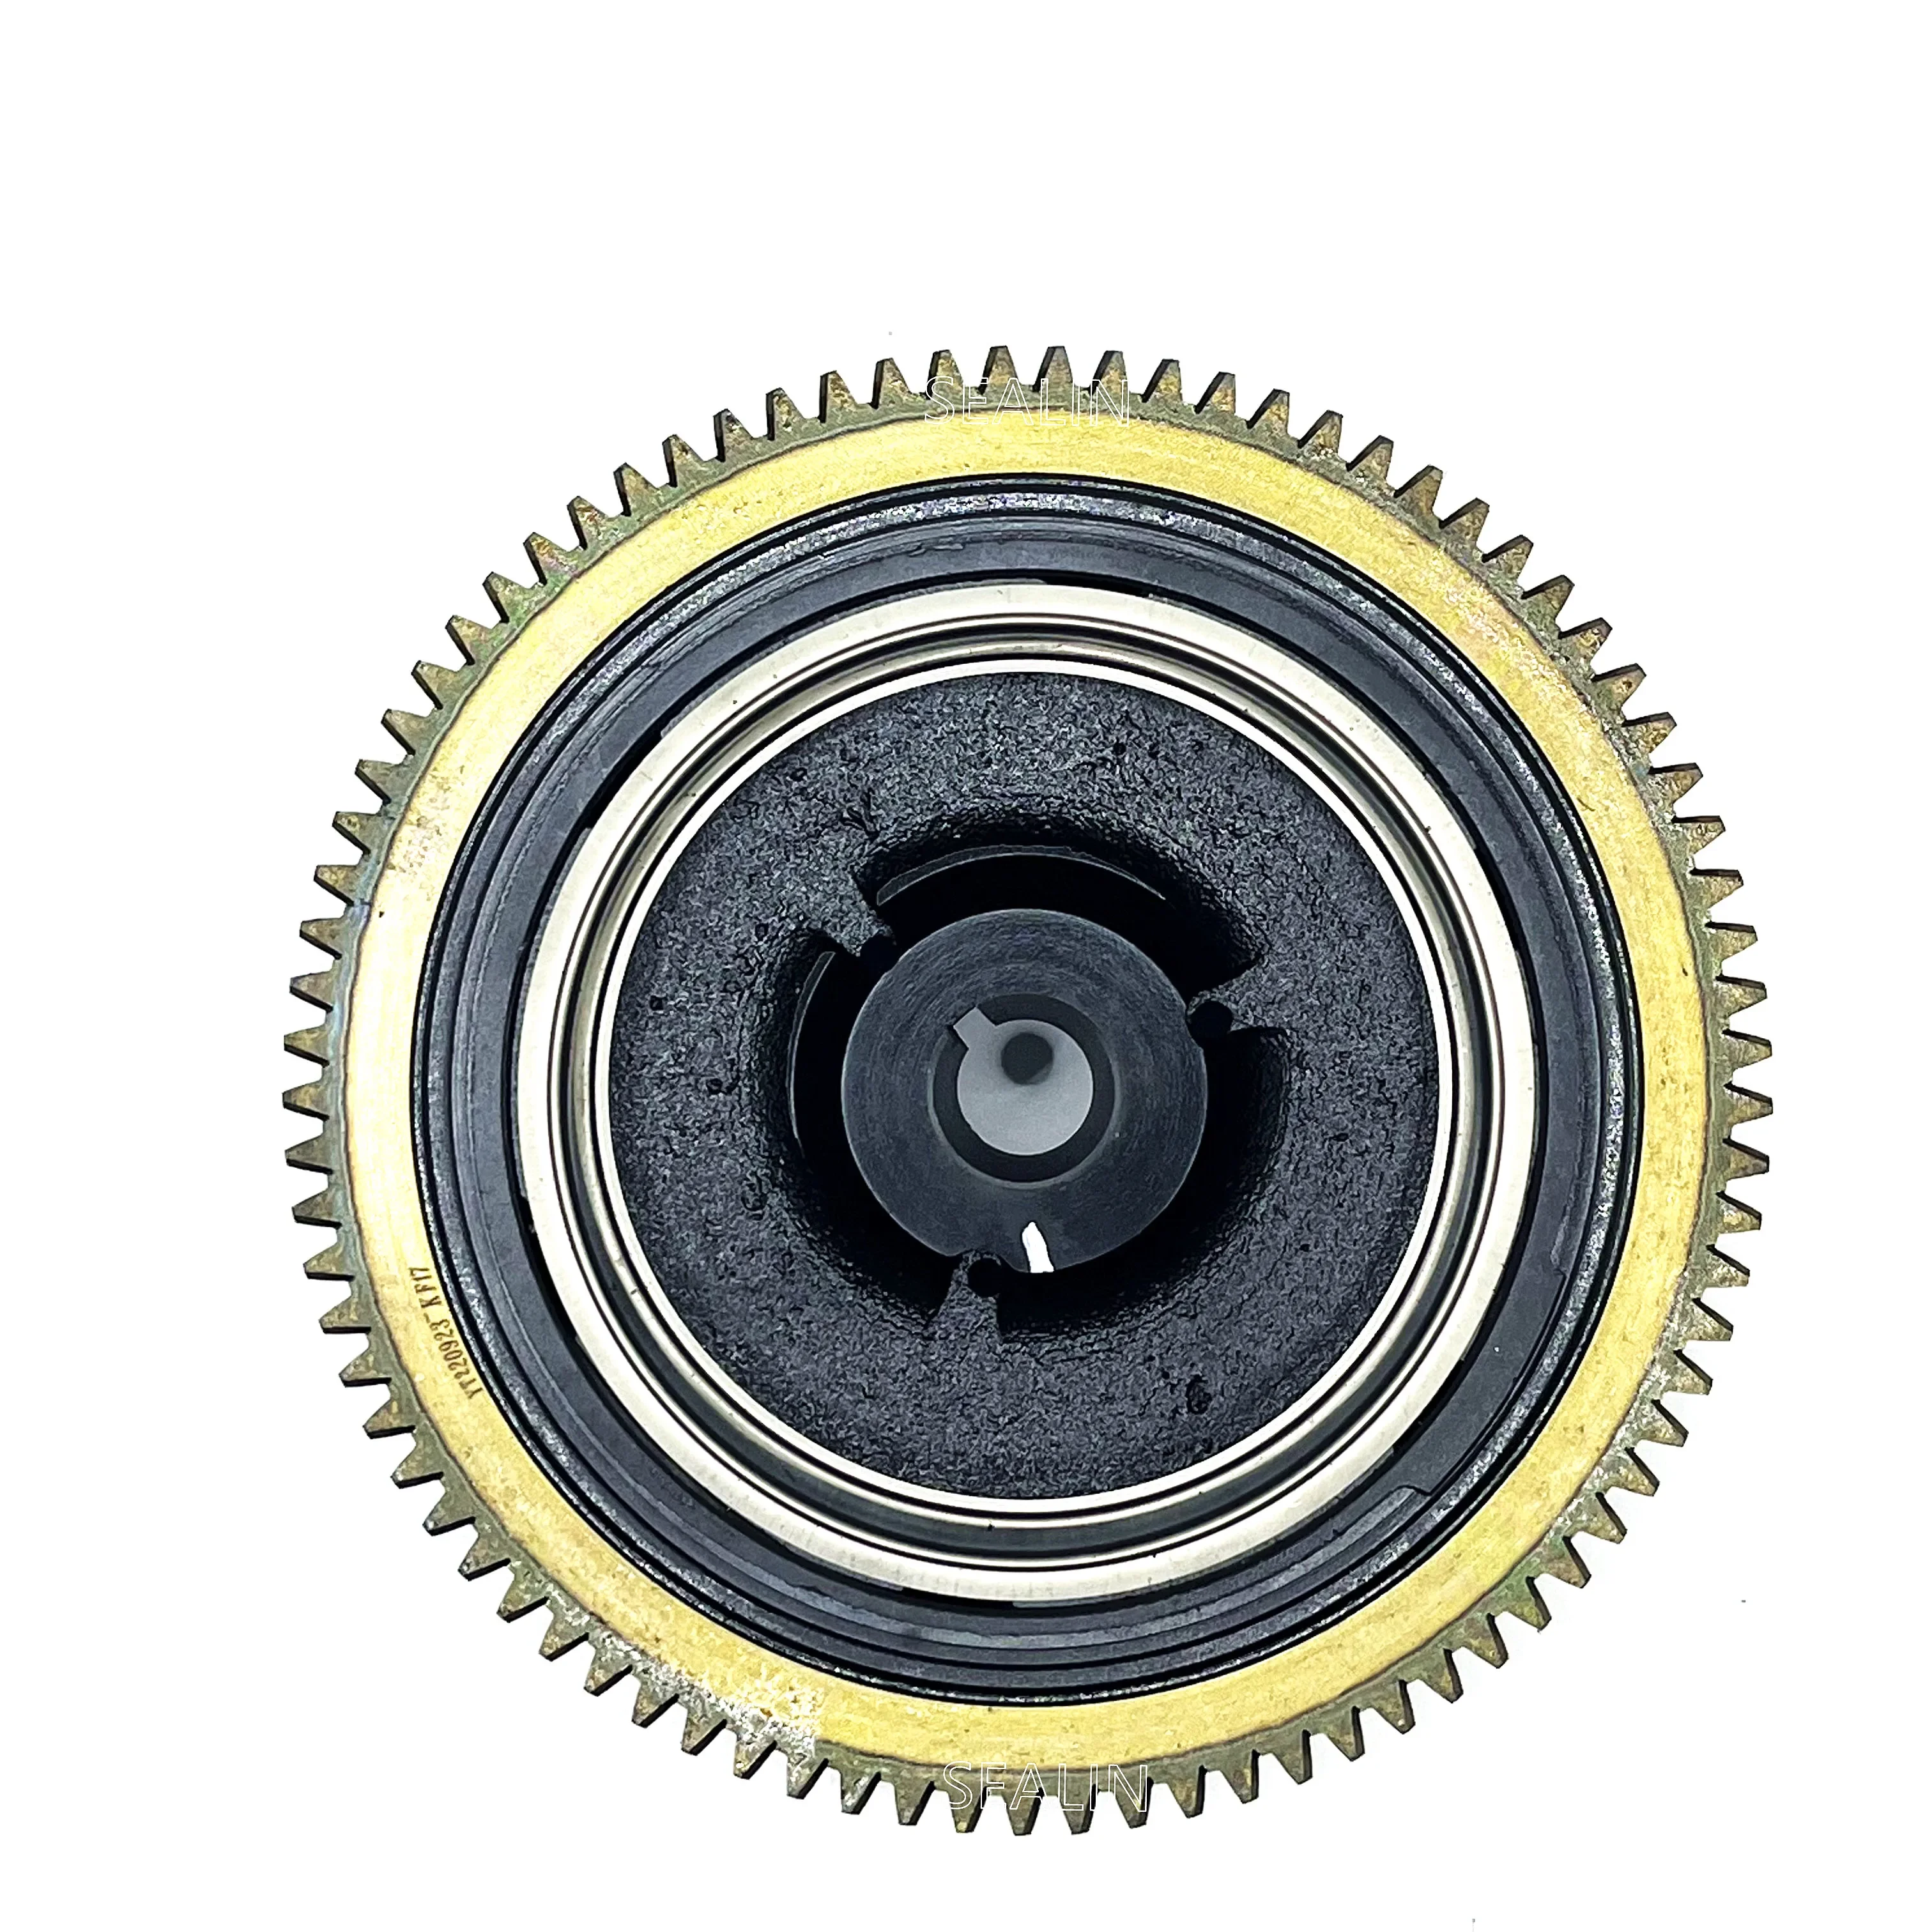 

66M-85550-10 66M-85550 Flywheel Rotor Assembly for Yamaha Parsun Outboard Motor 4 Stroke F9.9 F15 9.9HP 13.5HP 15HP